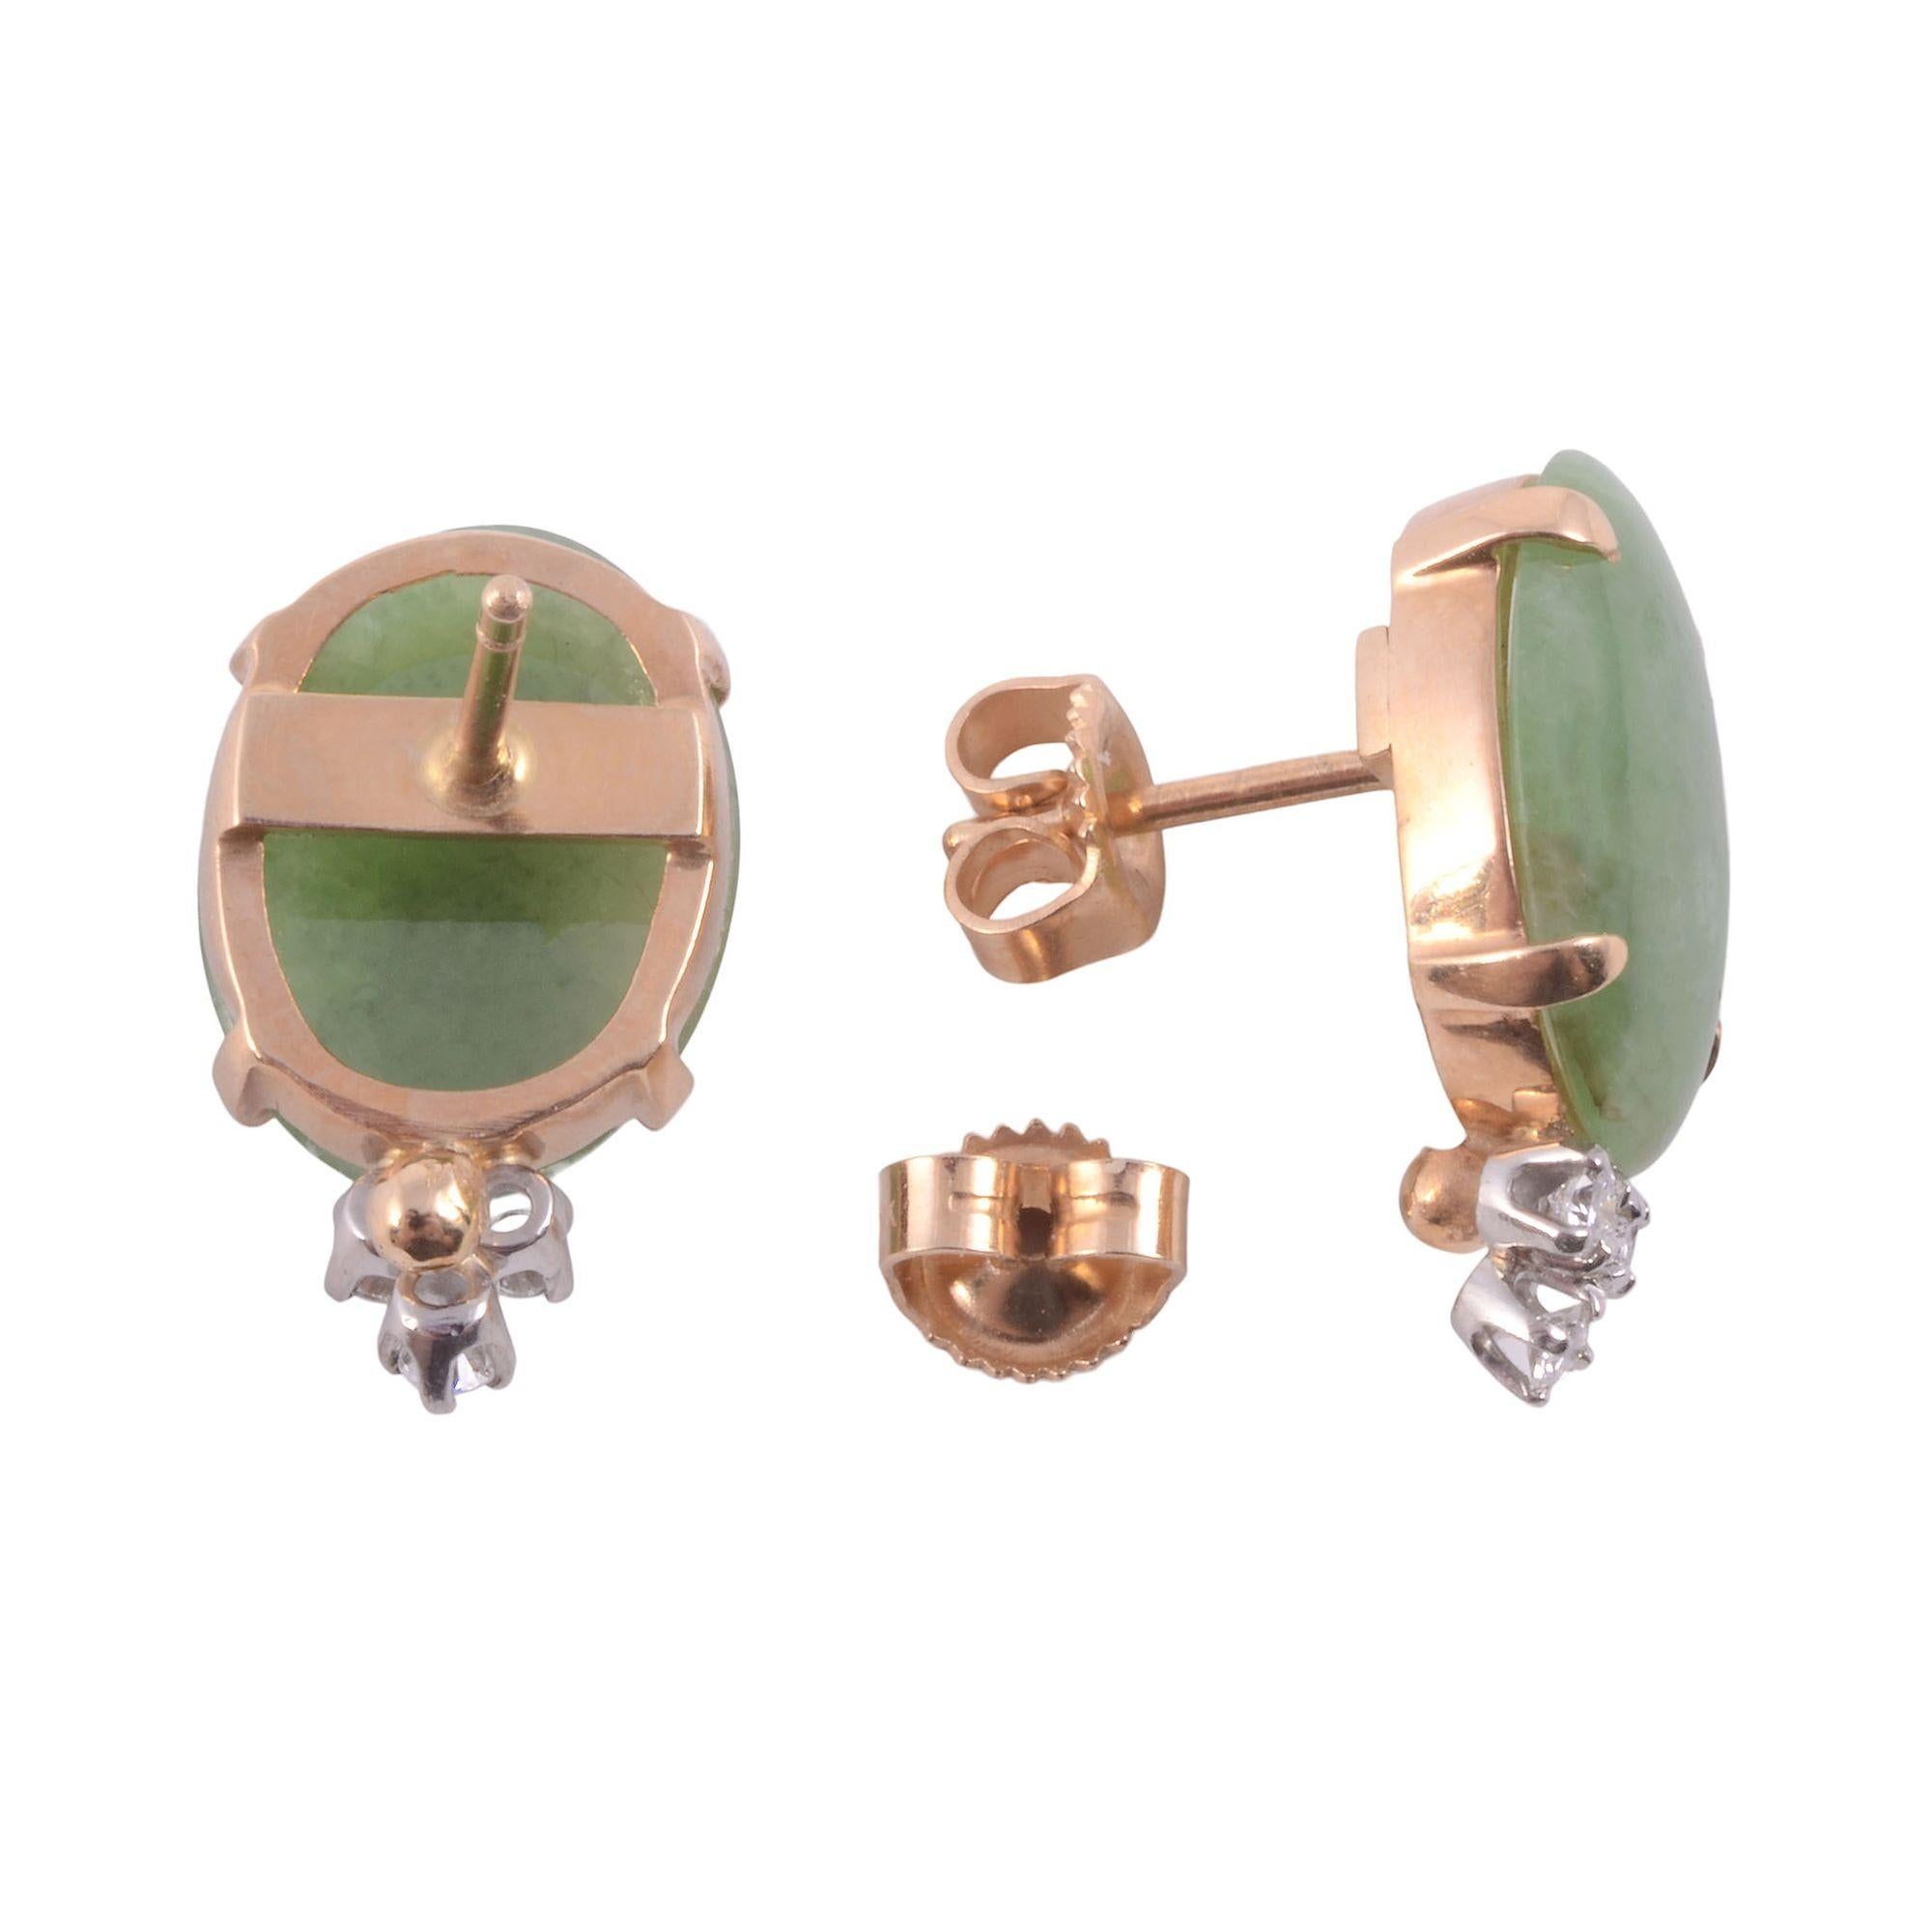 Estate oval jade earrings. These 14 karat yellow gold post earrings feature oval jade accented with round diamonds at .16 carat total weight, G-H in color. [KIMH 532]

Dimensions
19.6mm H overall; jade 14.2mm x 11.2mm